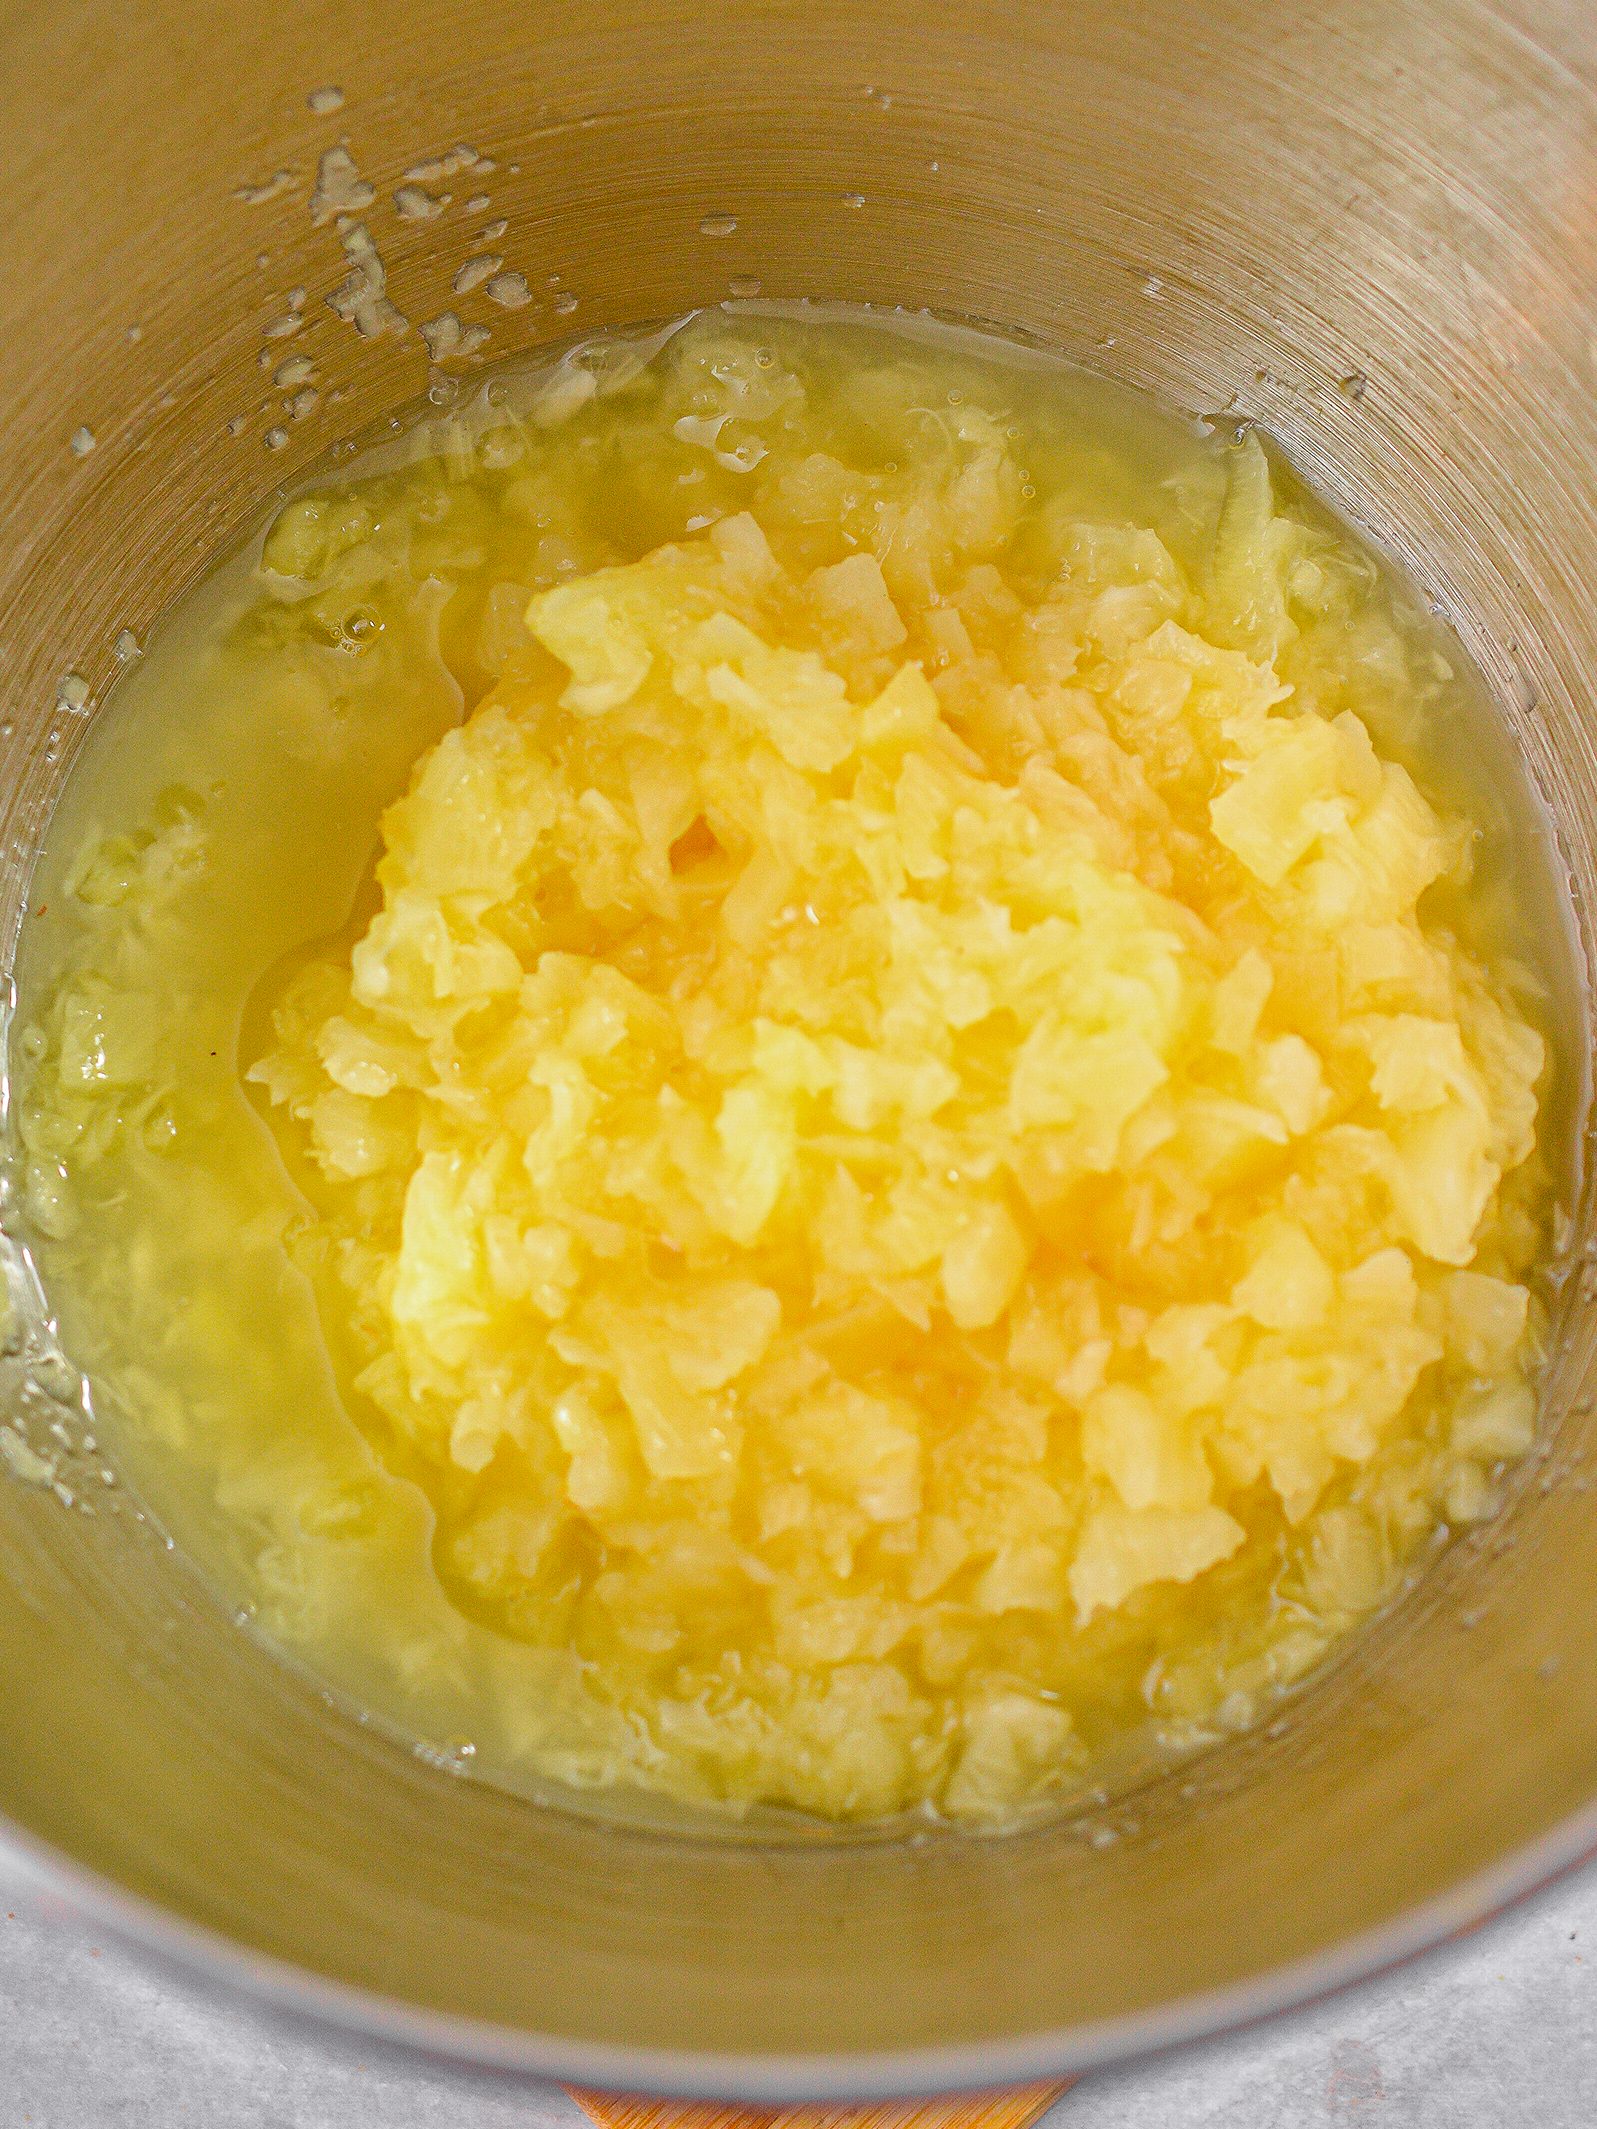 In a mixing bowl, add 1 can of crushed pineapple.